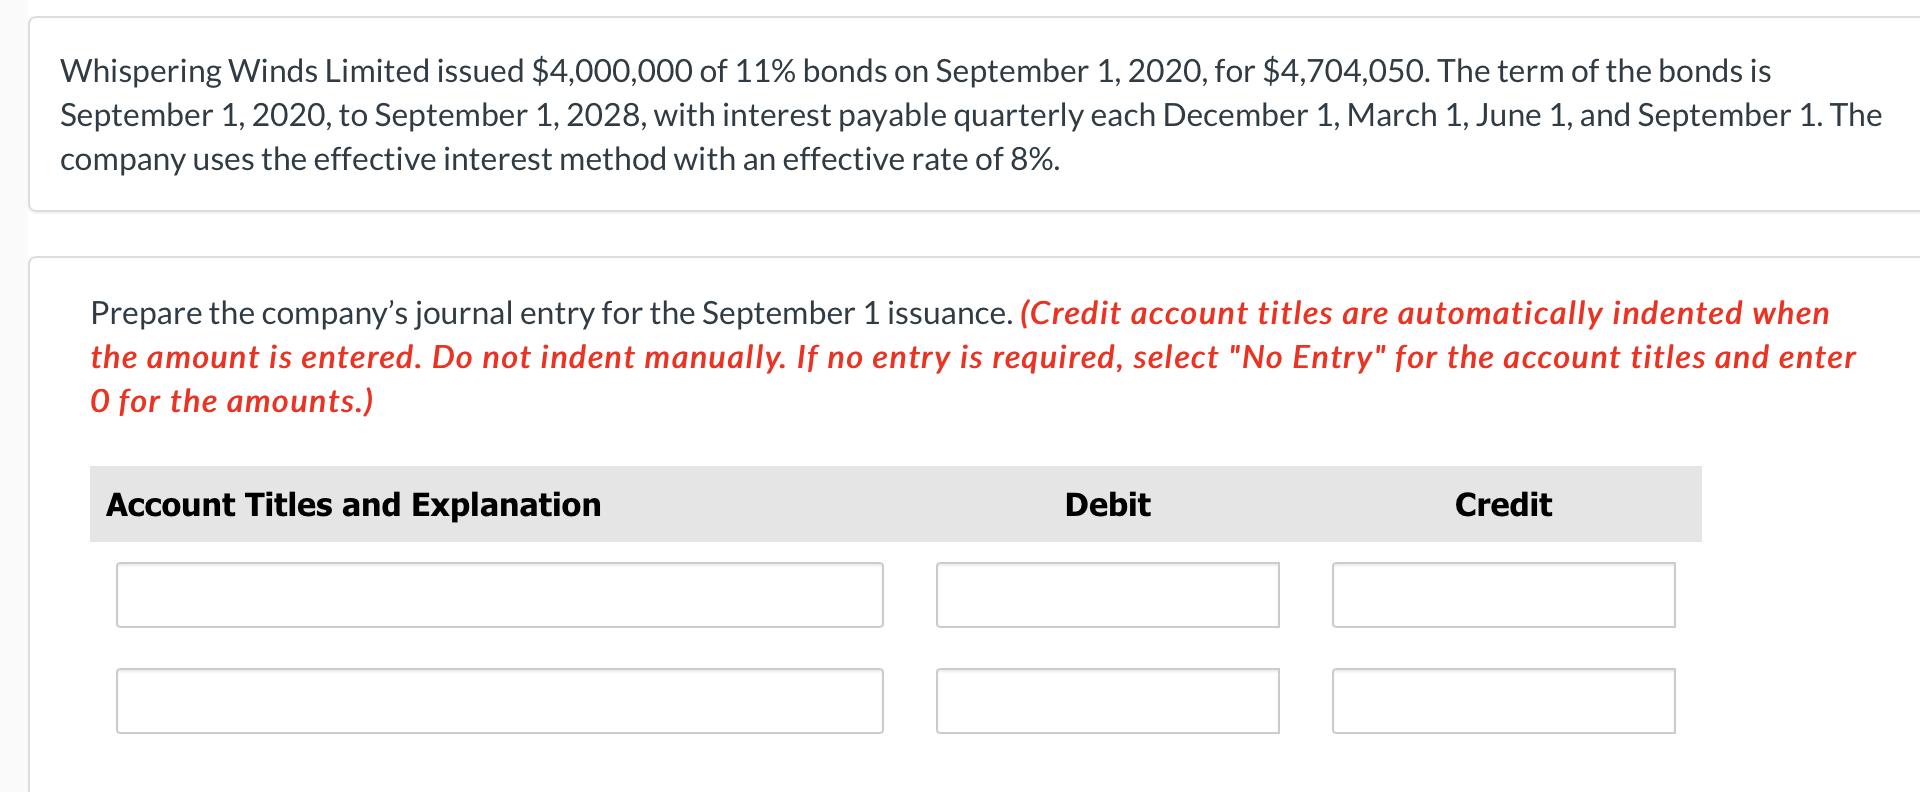 Whispering Winds Limited issued $4,000,000 of 11% bonds on September 1, 2020, for $4,704,050. The term of the bonds isSeptem